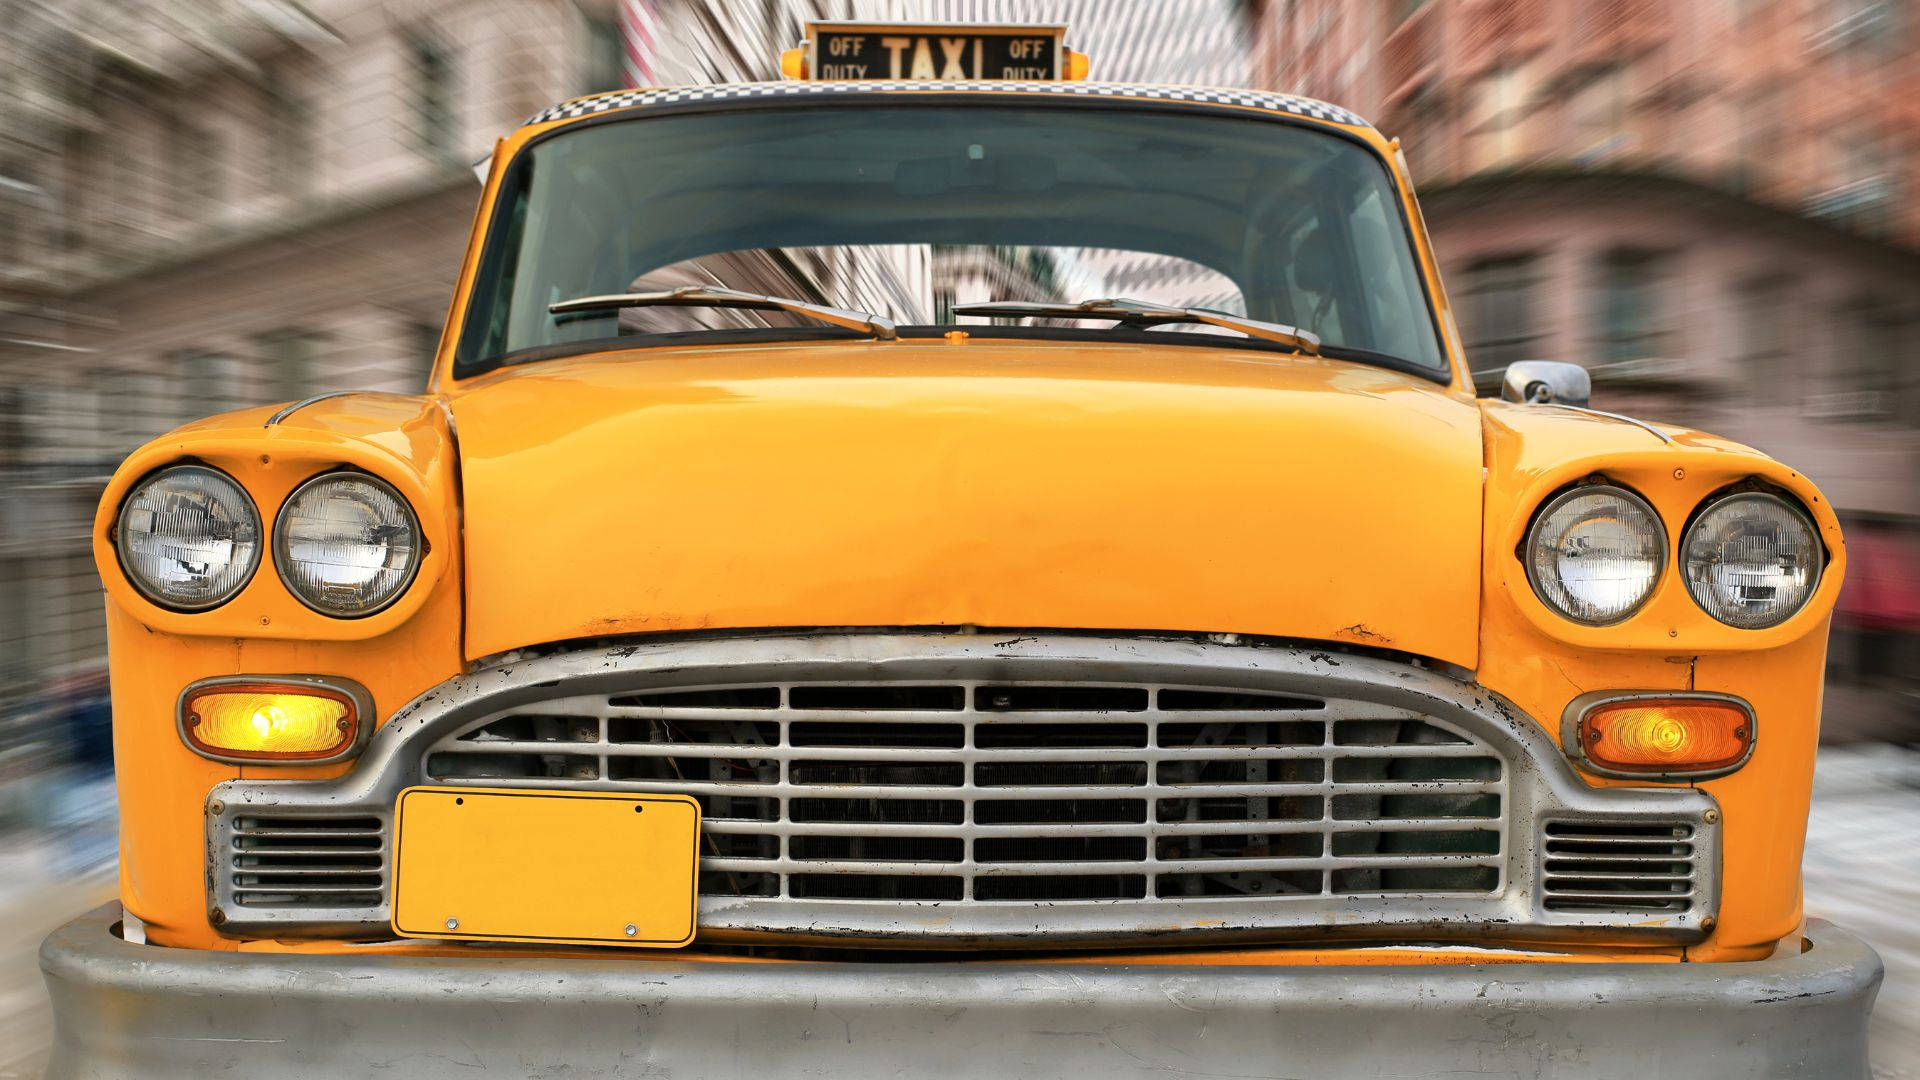 Old Fashioned Taxi Front View Background